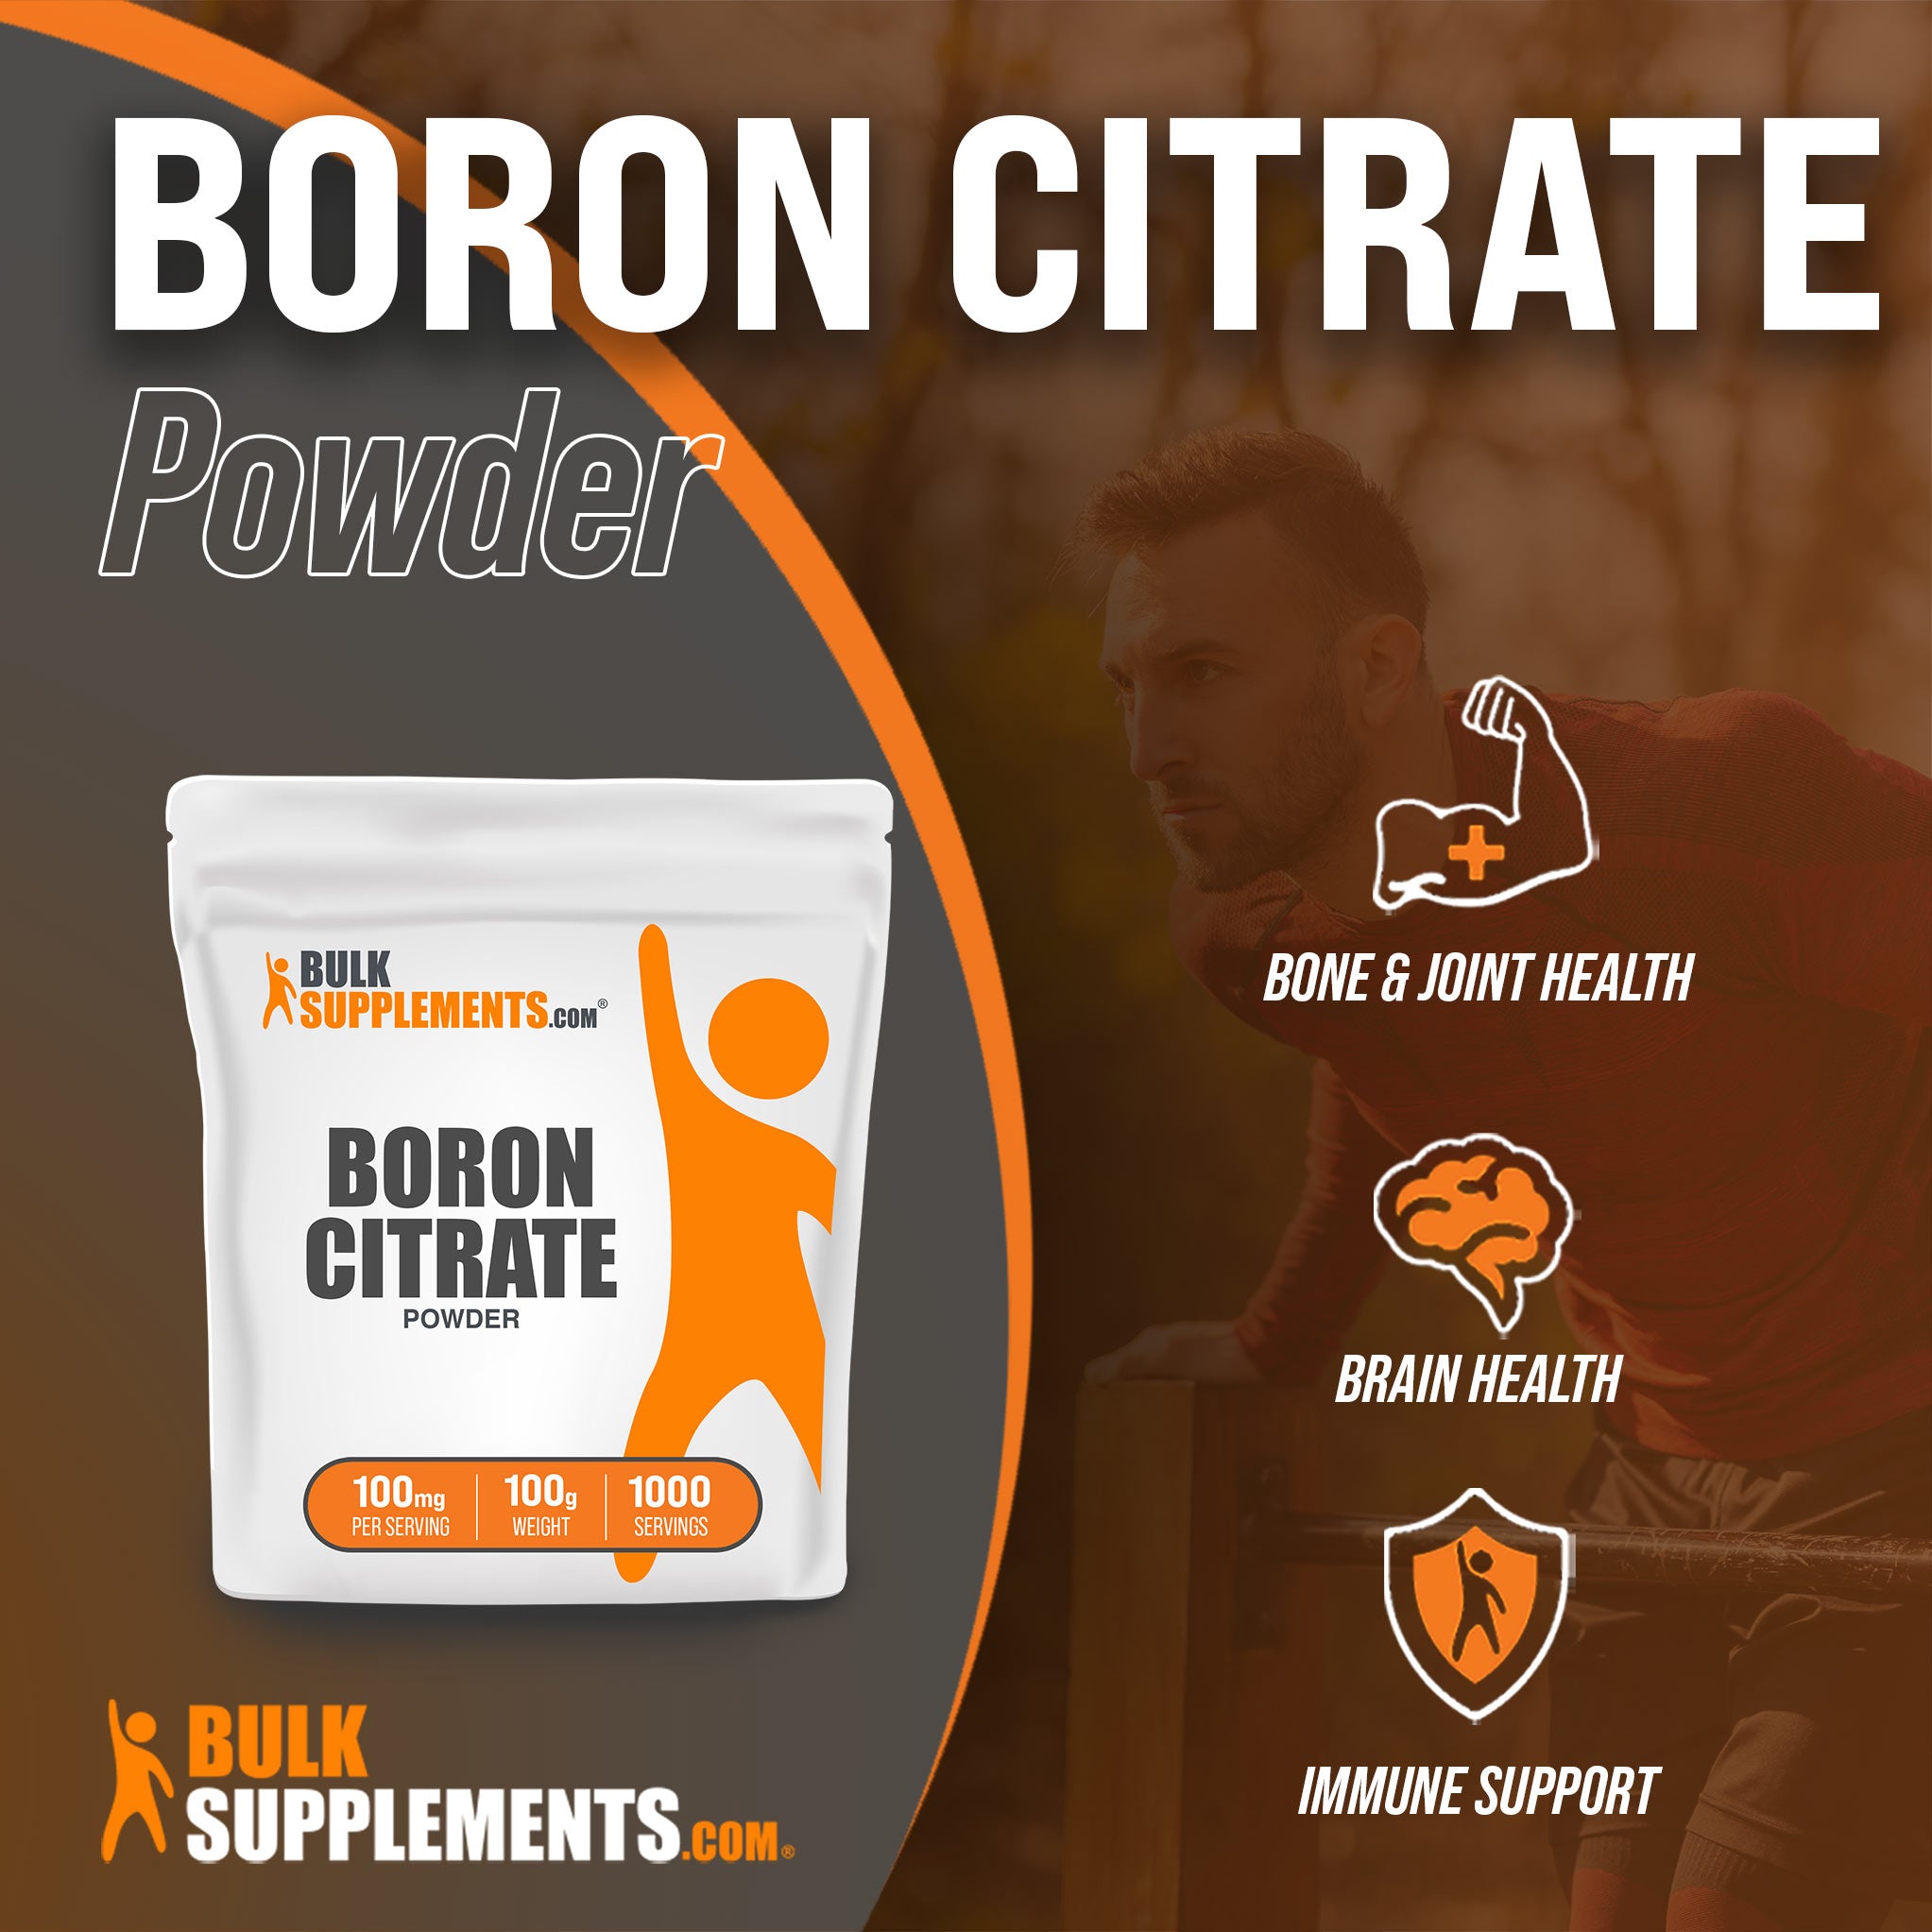 100g of Boron Citrate: 100mg Servings